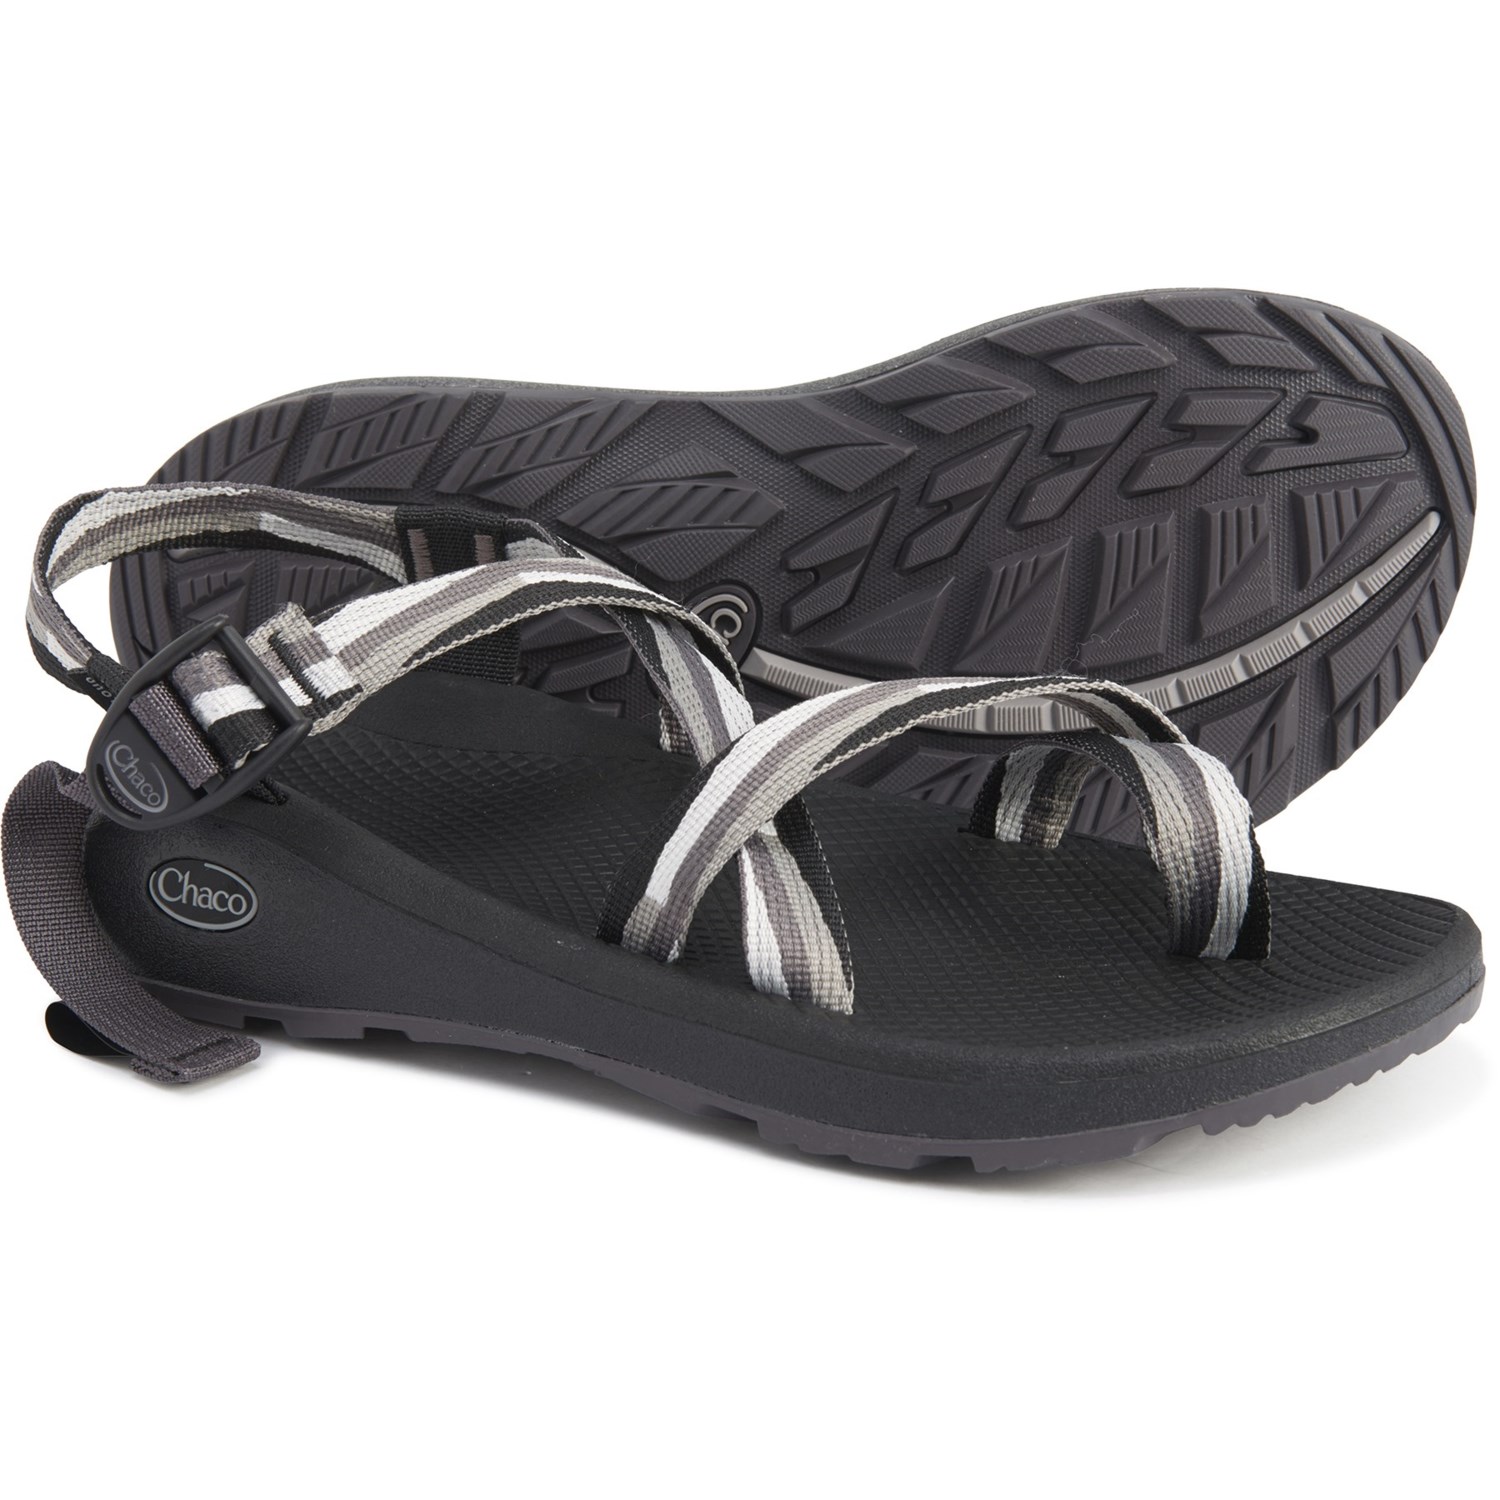 black and grey chacos